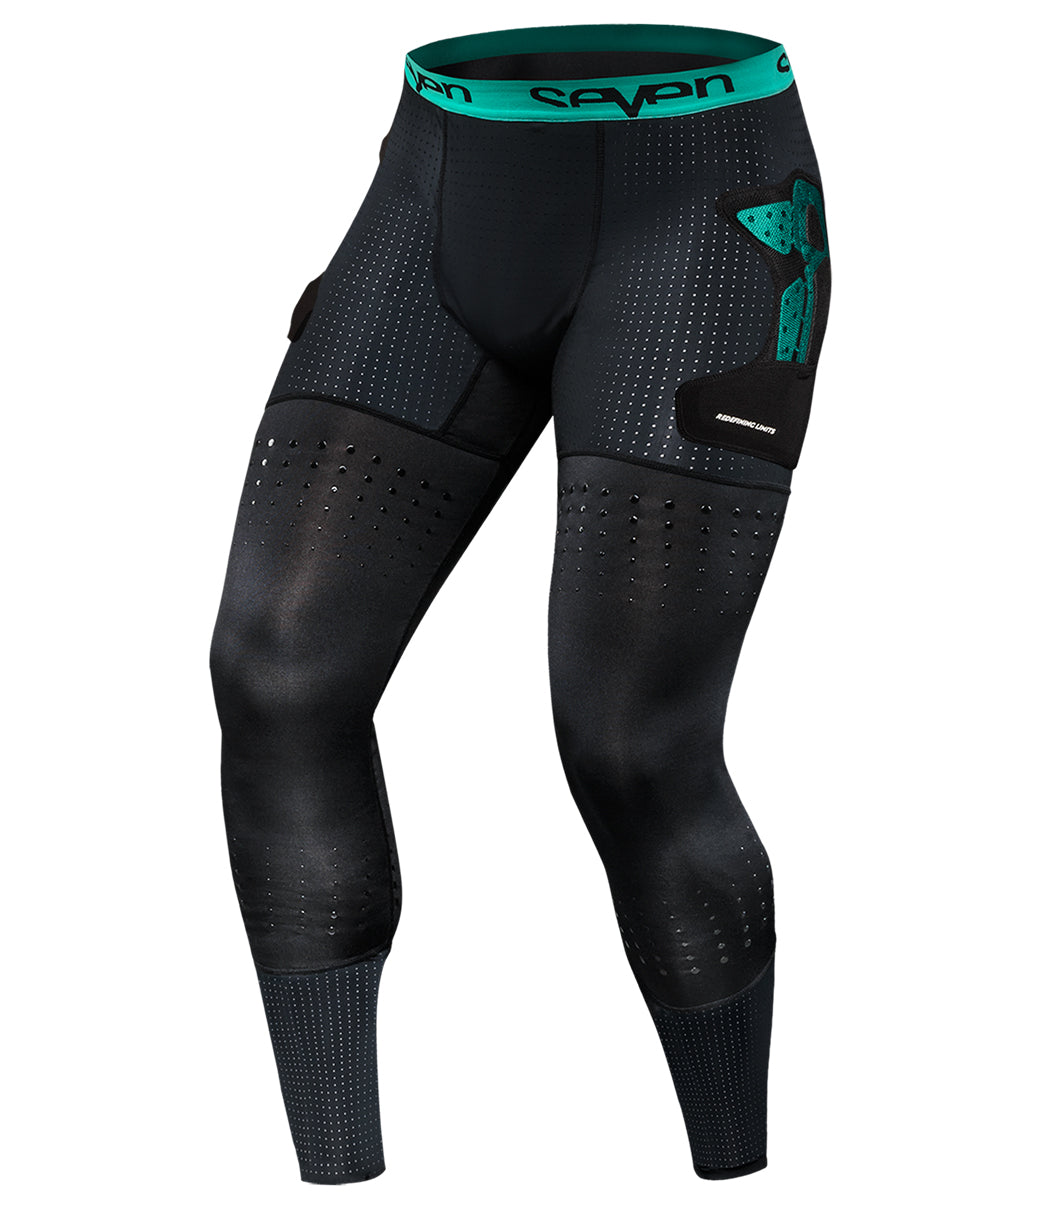 15 Best Pairs of Compression Pants and Leggings for Men in 2023